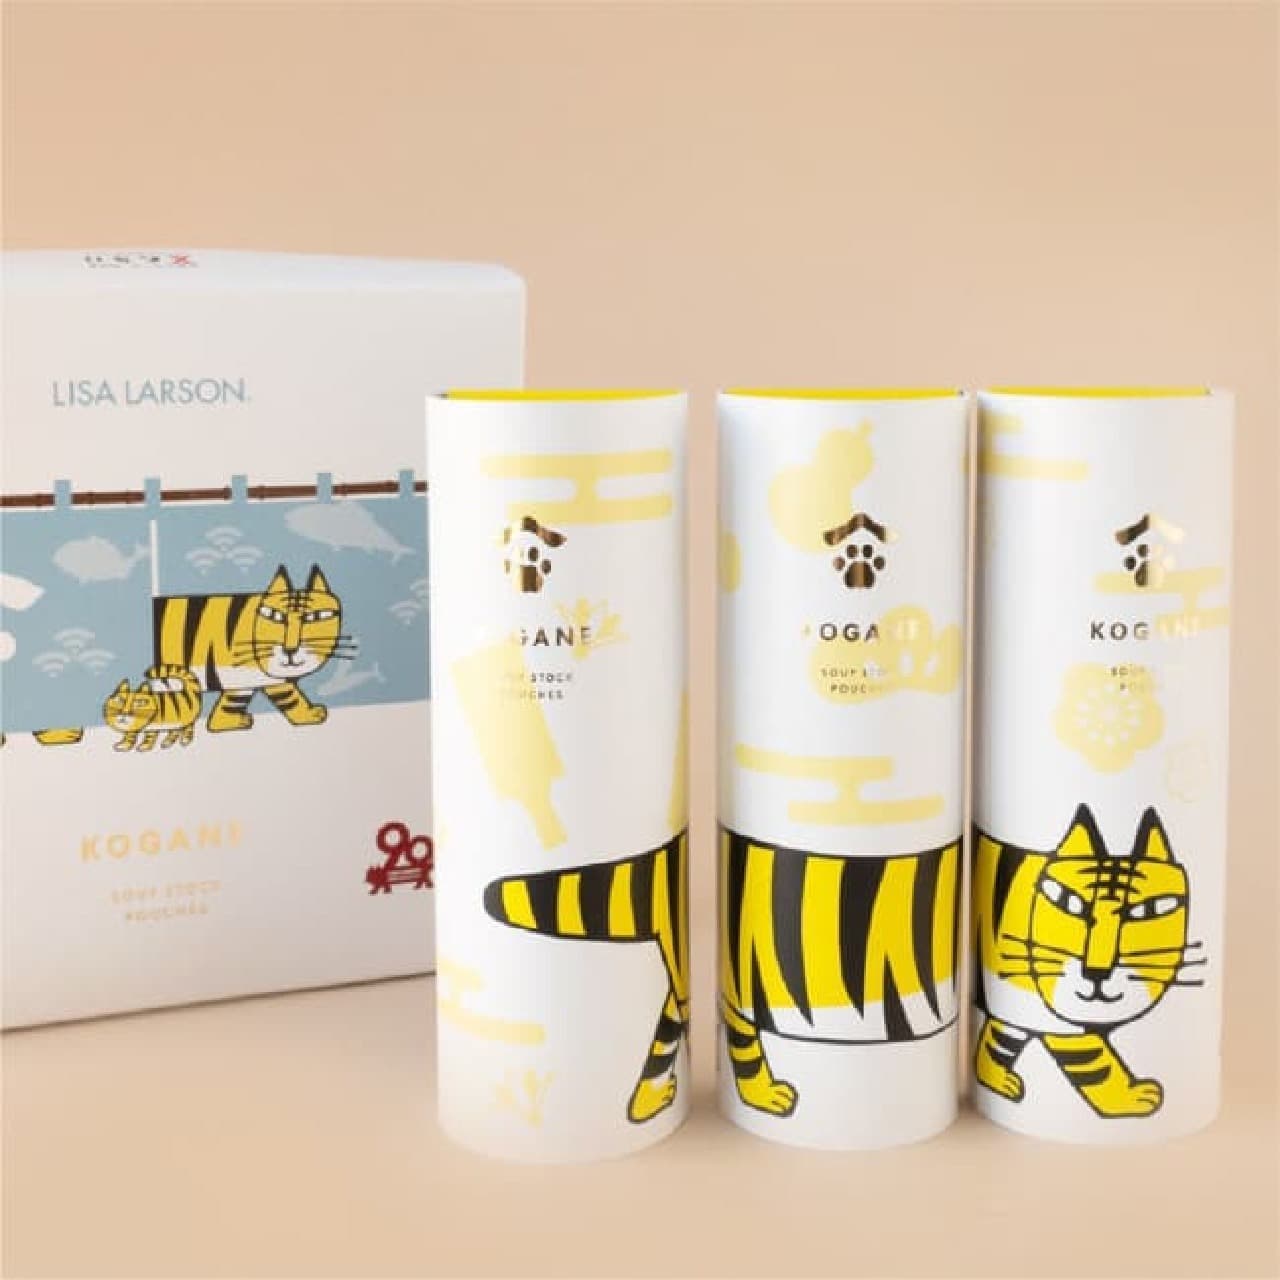 Lisa Larson "Tiger Pattern Mikey" New Year's Gift --Collaboration with "Chikiri Shimizu Shoten", a long-established store of dried bonito and dashi stock! Also with a towel